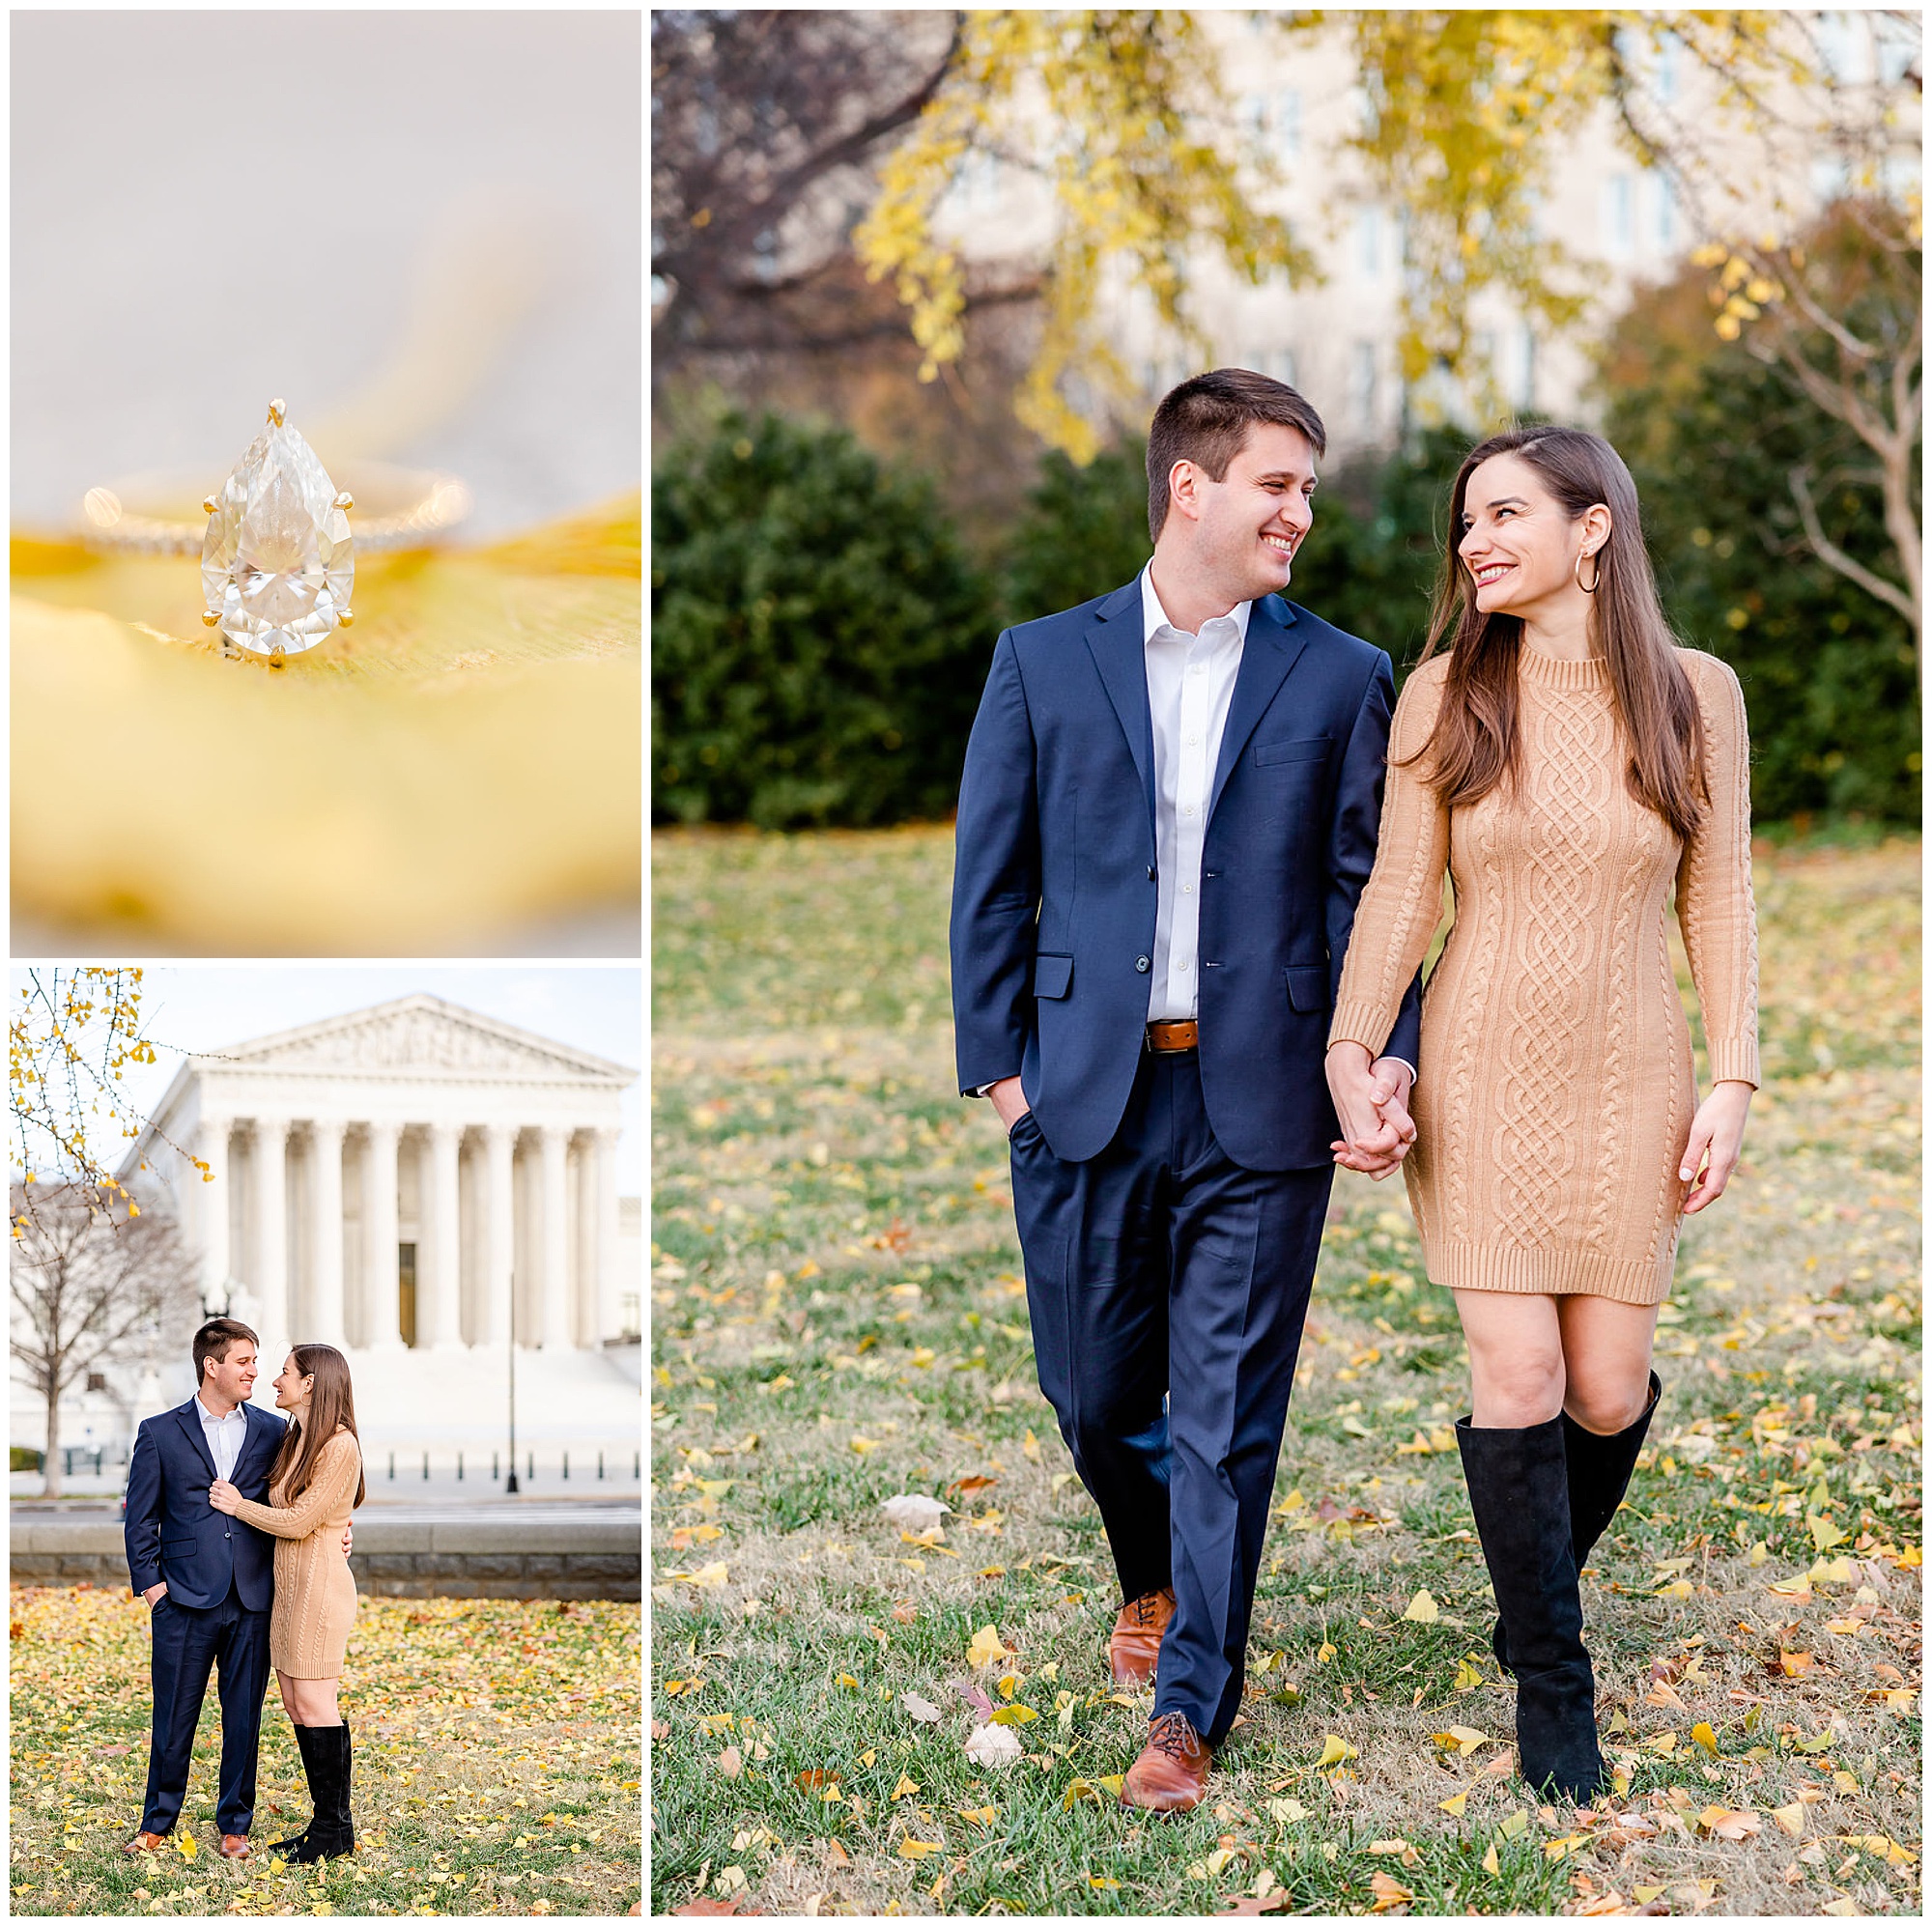 autumn Capitol Hill engagement session, Capitol Hill engagement photos, Capitol Hill photographer, DC engagement photography, DC engagement photographer, DC wedding photography, autumn engagement photos, casual engagement photos, Rachel E.H. Photography, couple holding hands, couple hugging, gold engagement ring on leaf